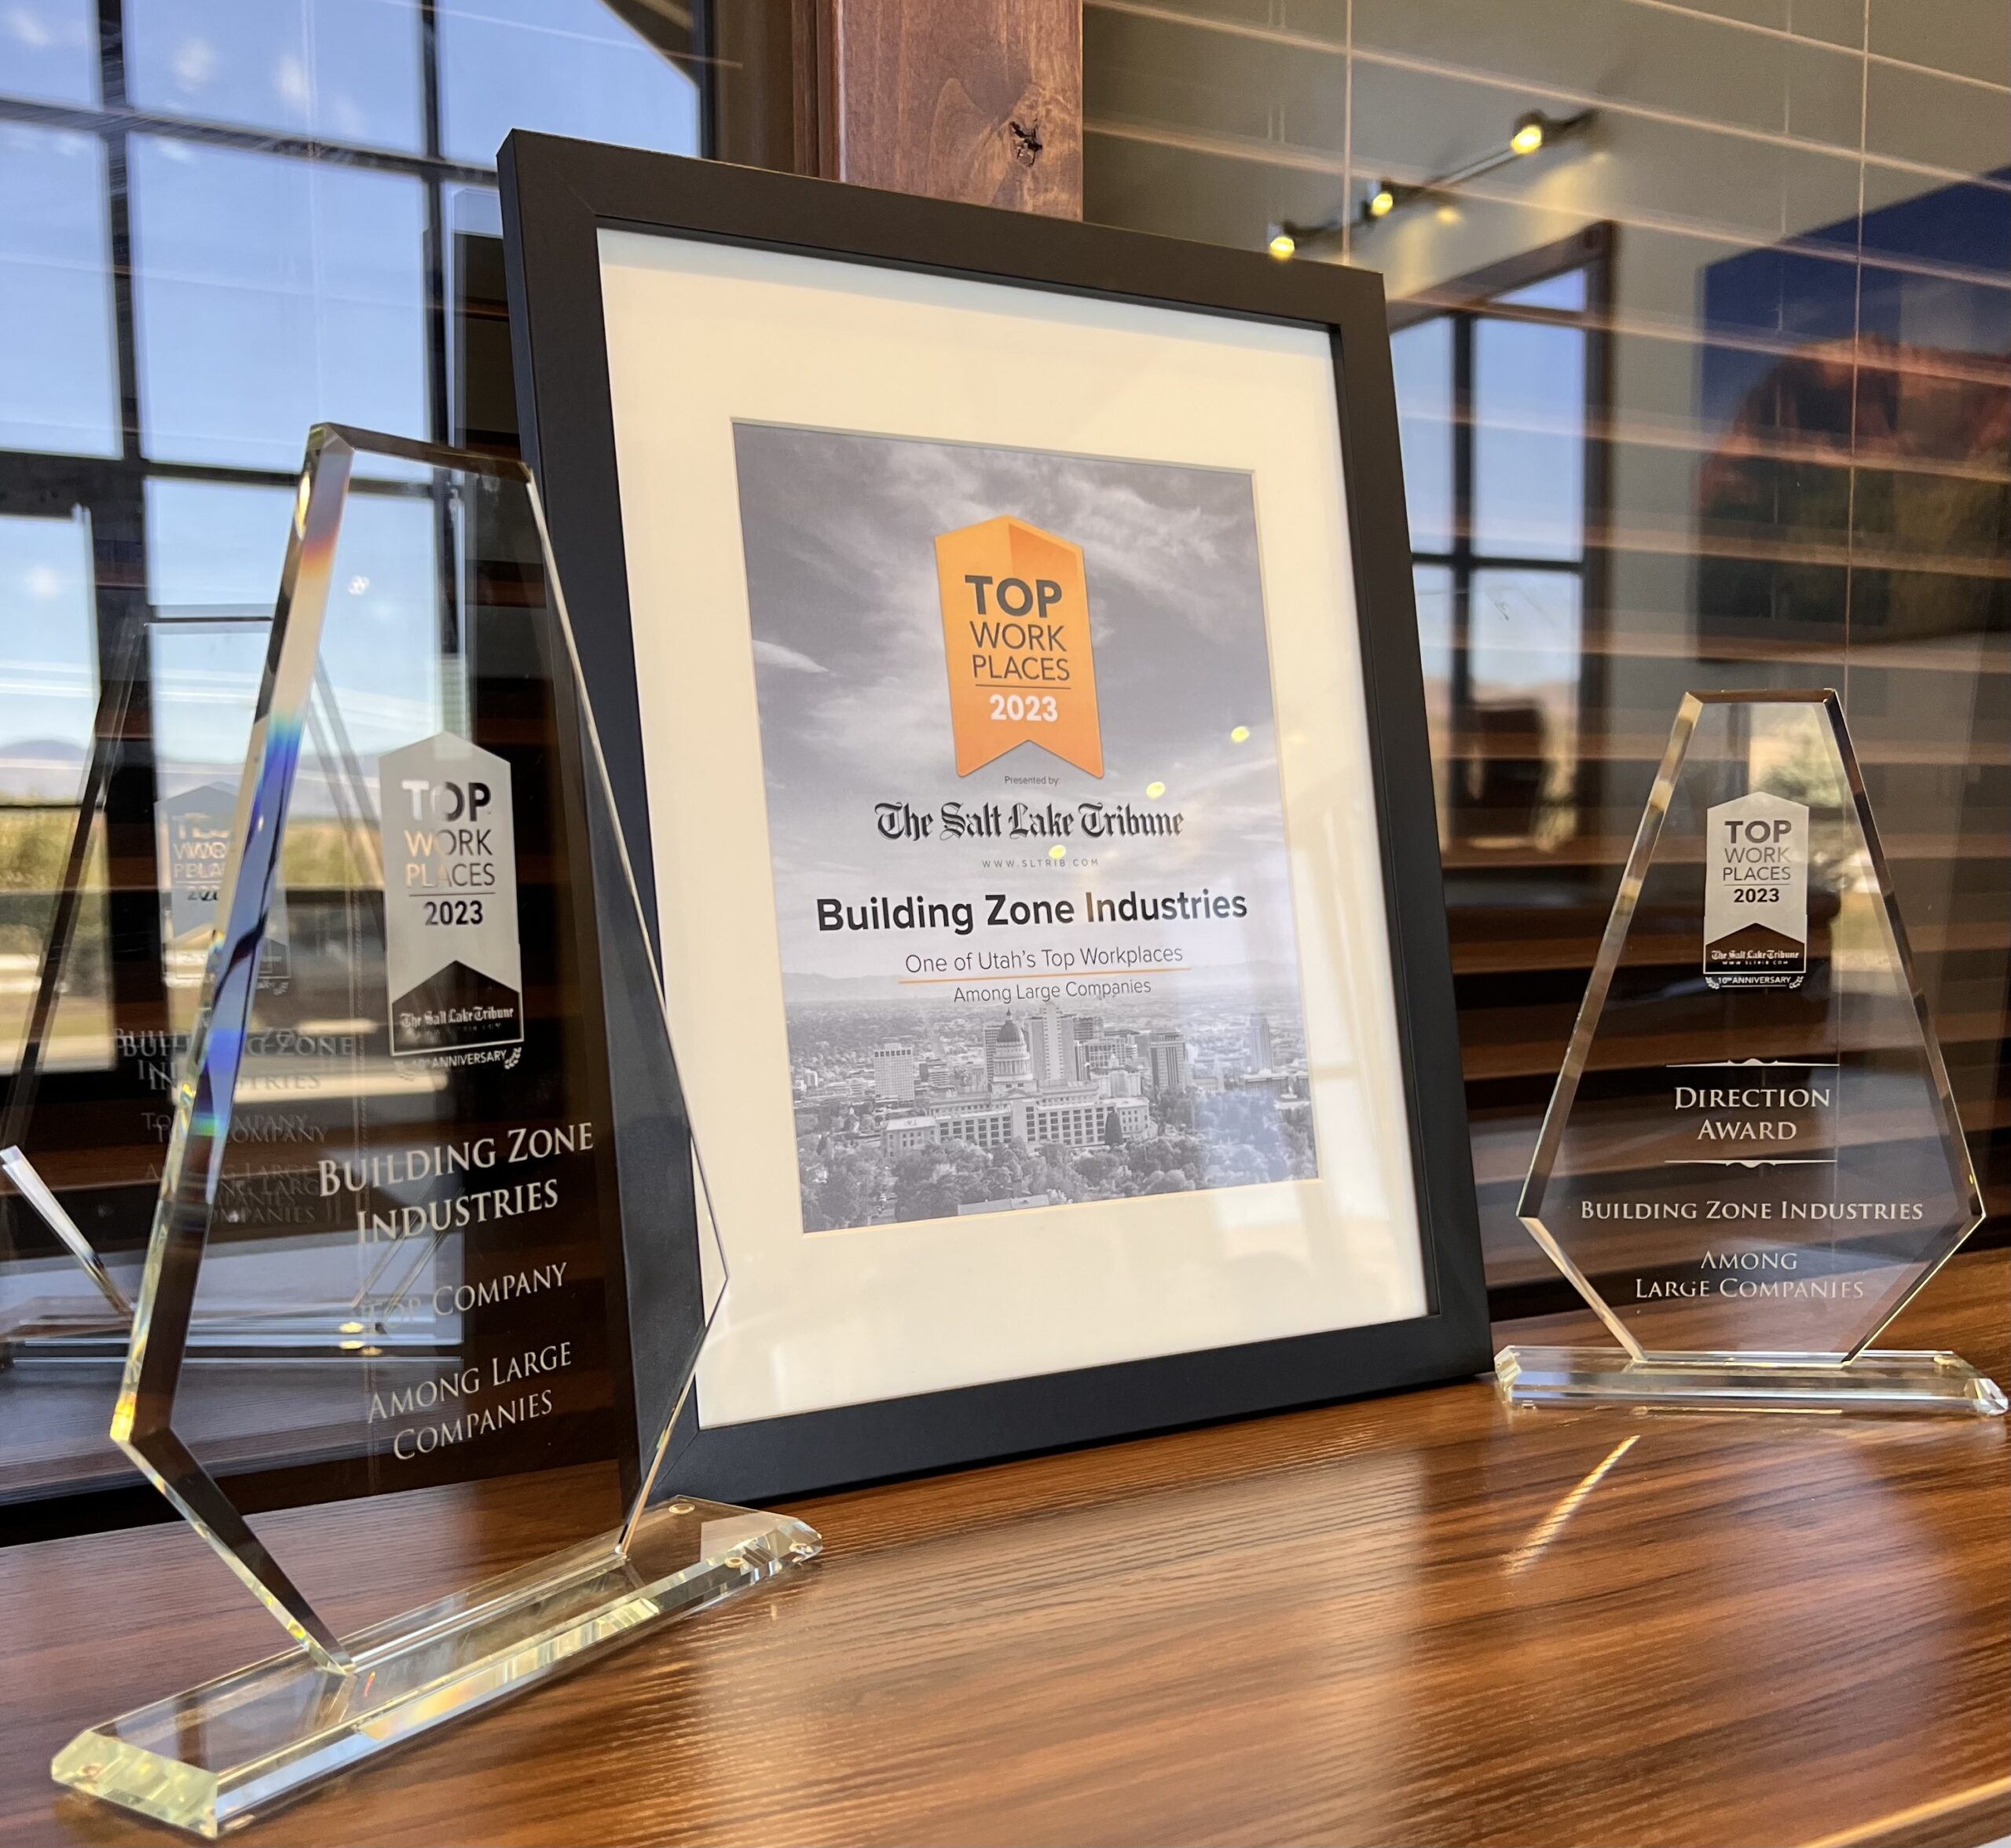 BZI Named #1 in The Salt Lake Tribune’s Top Workplaces 2023 Awards for Large Business and Recognized for Its Positive Growth, Inspiration and Vision with the “Direction Award”